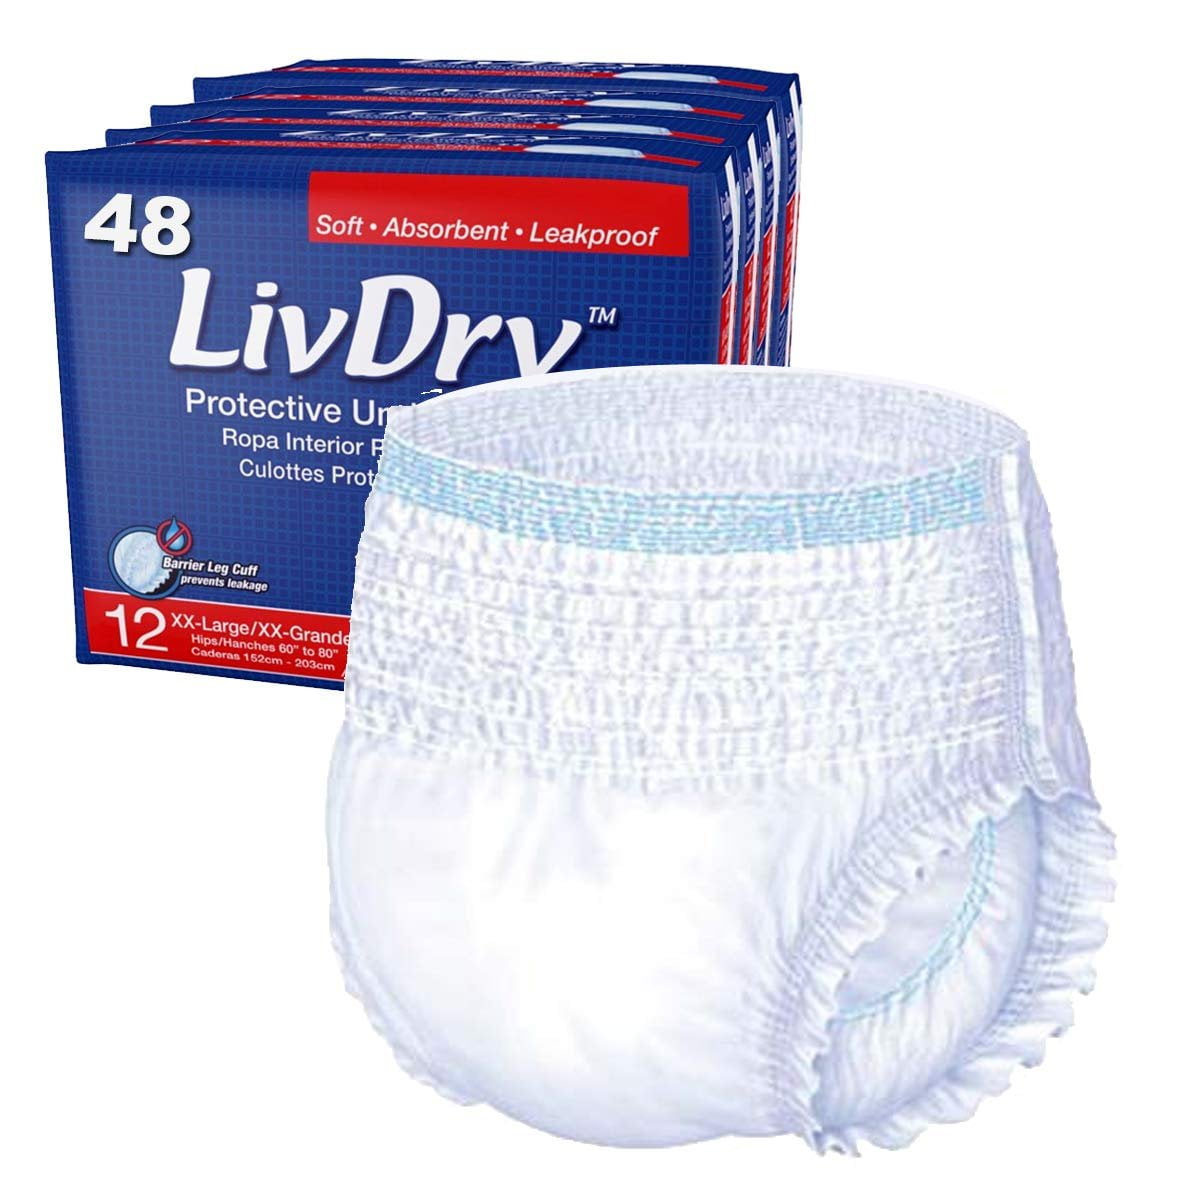 Adult Diapers Covers Reusable Incontinence Pants Cloth Diaper Wraps  Washable Overnight Leakfree Underwear Protection Bed Sheet for Women Men  Bariatric